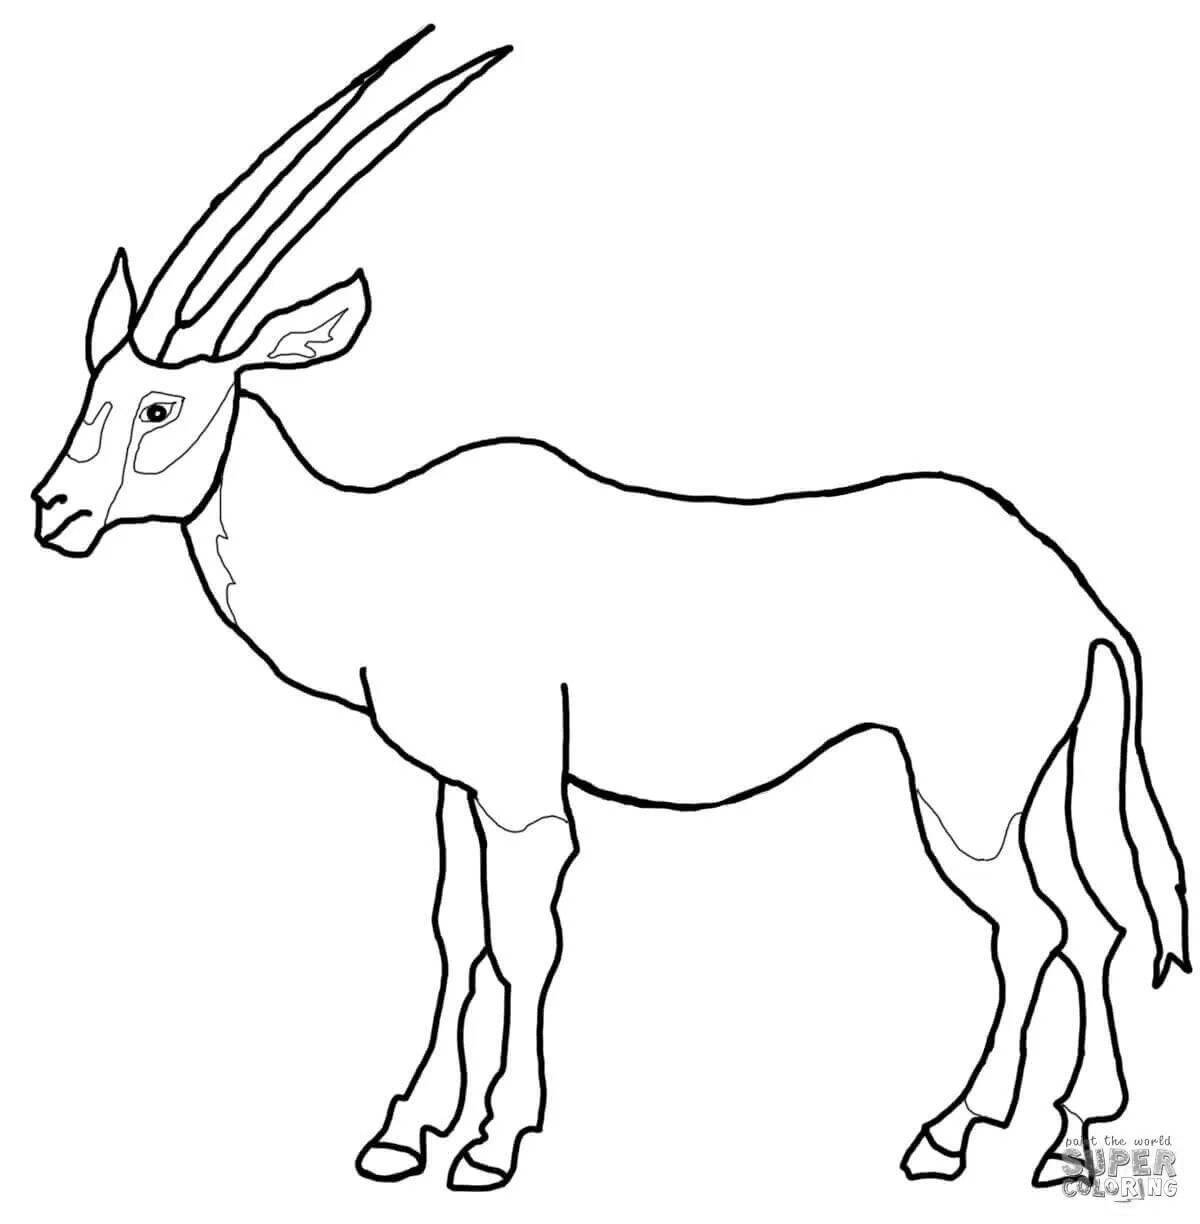 Coloring page dazzling gazelle